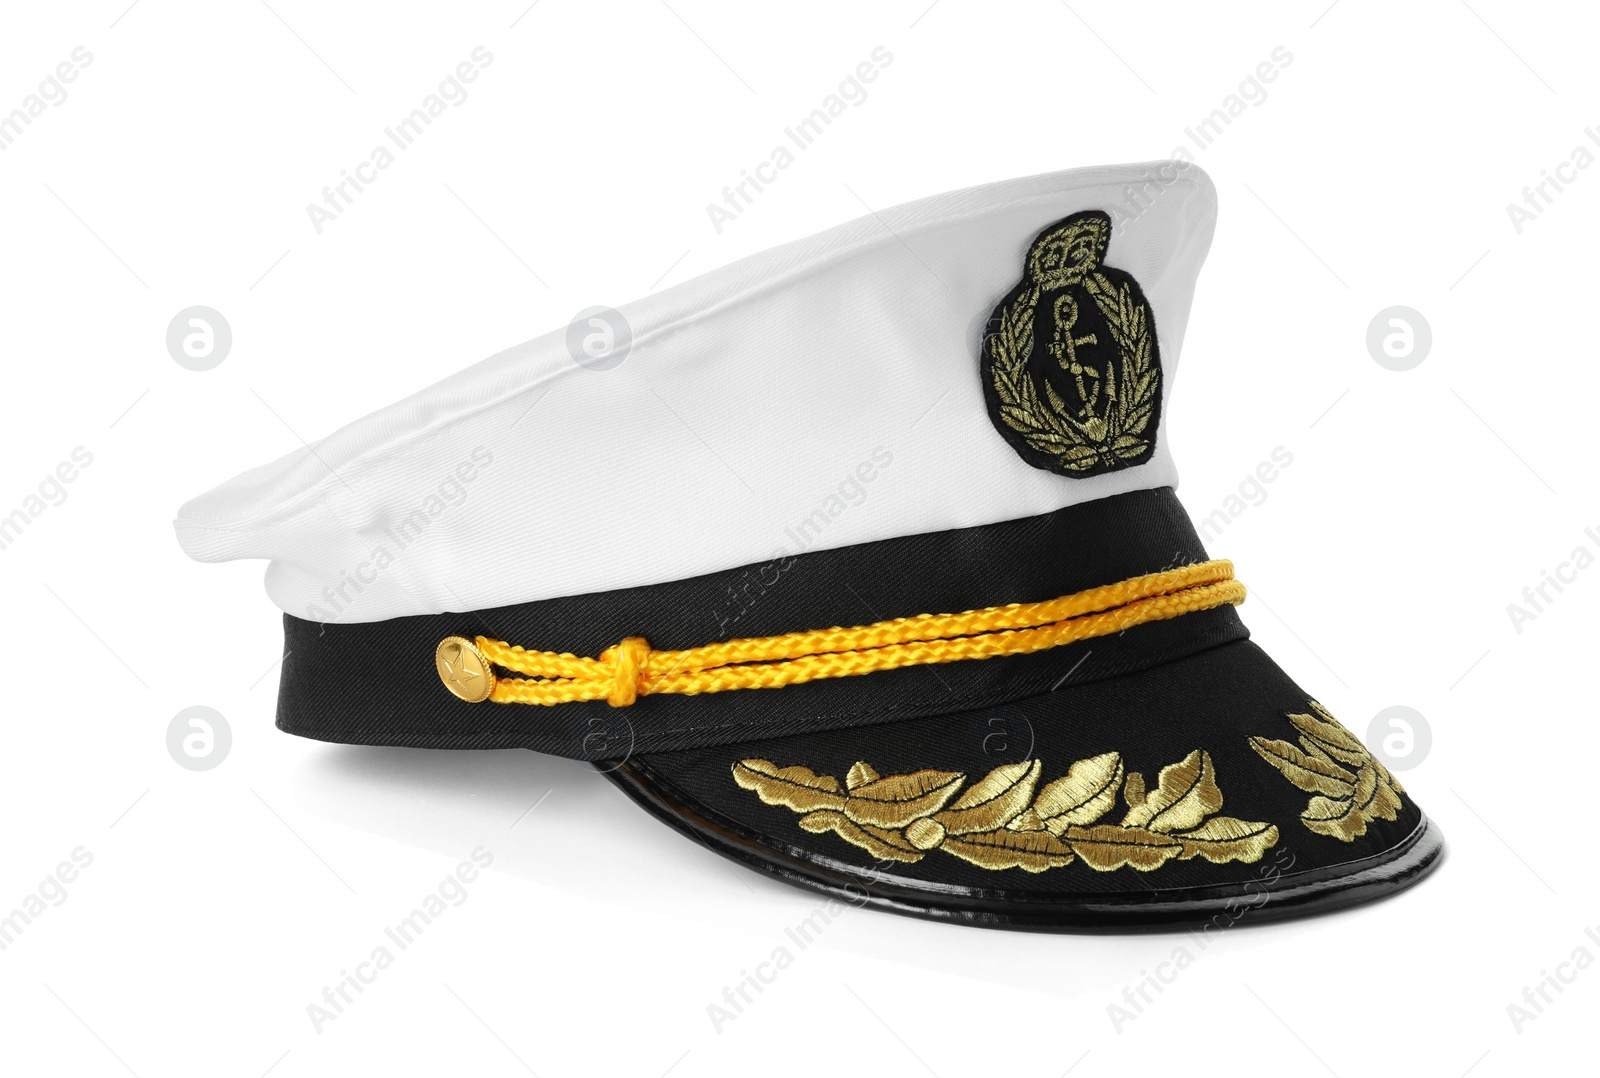 Photo of Peaked cap with accessories isolated on white